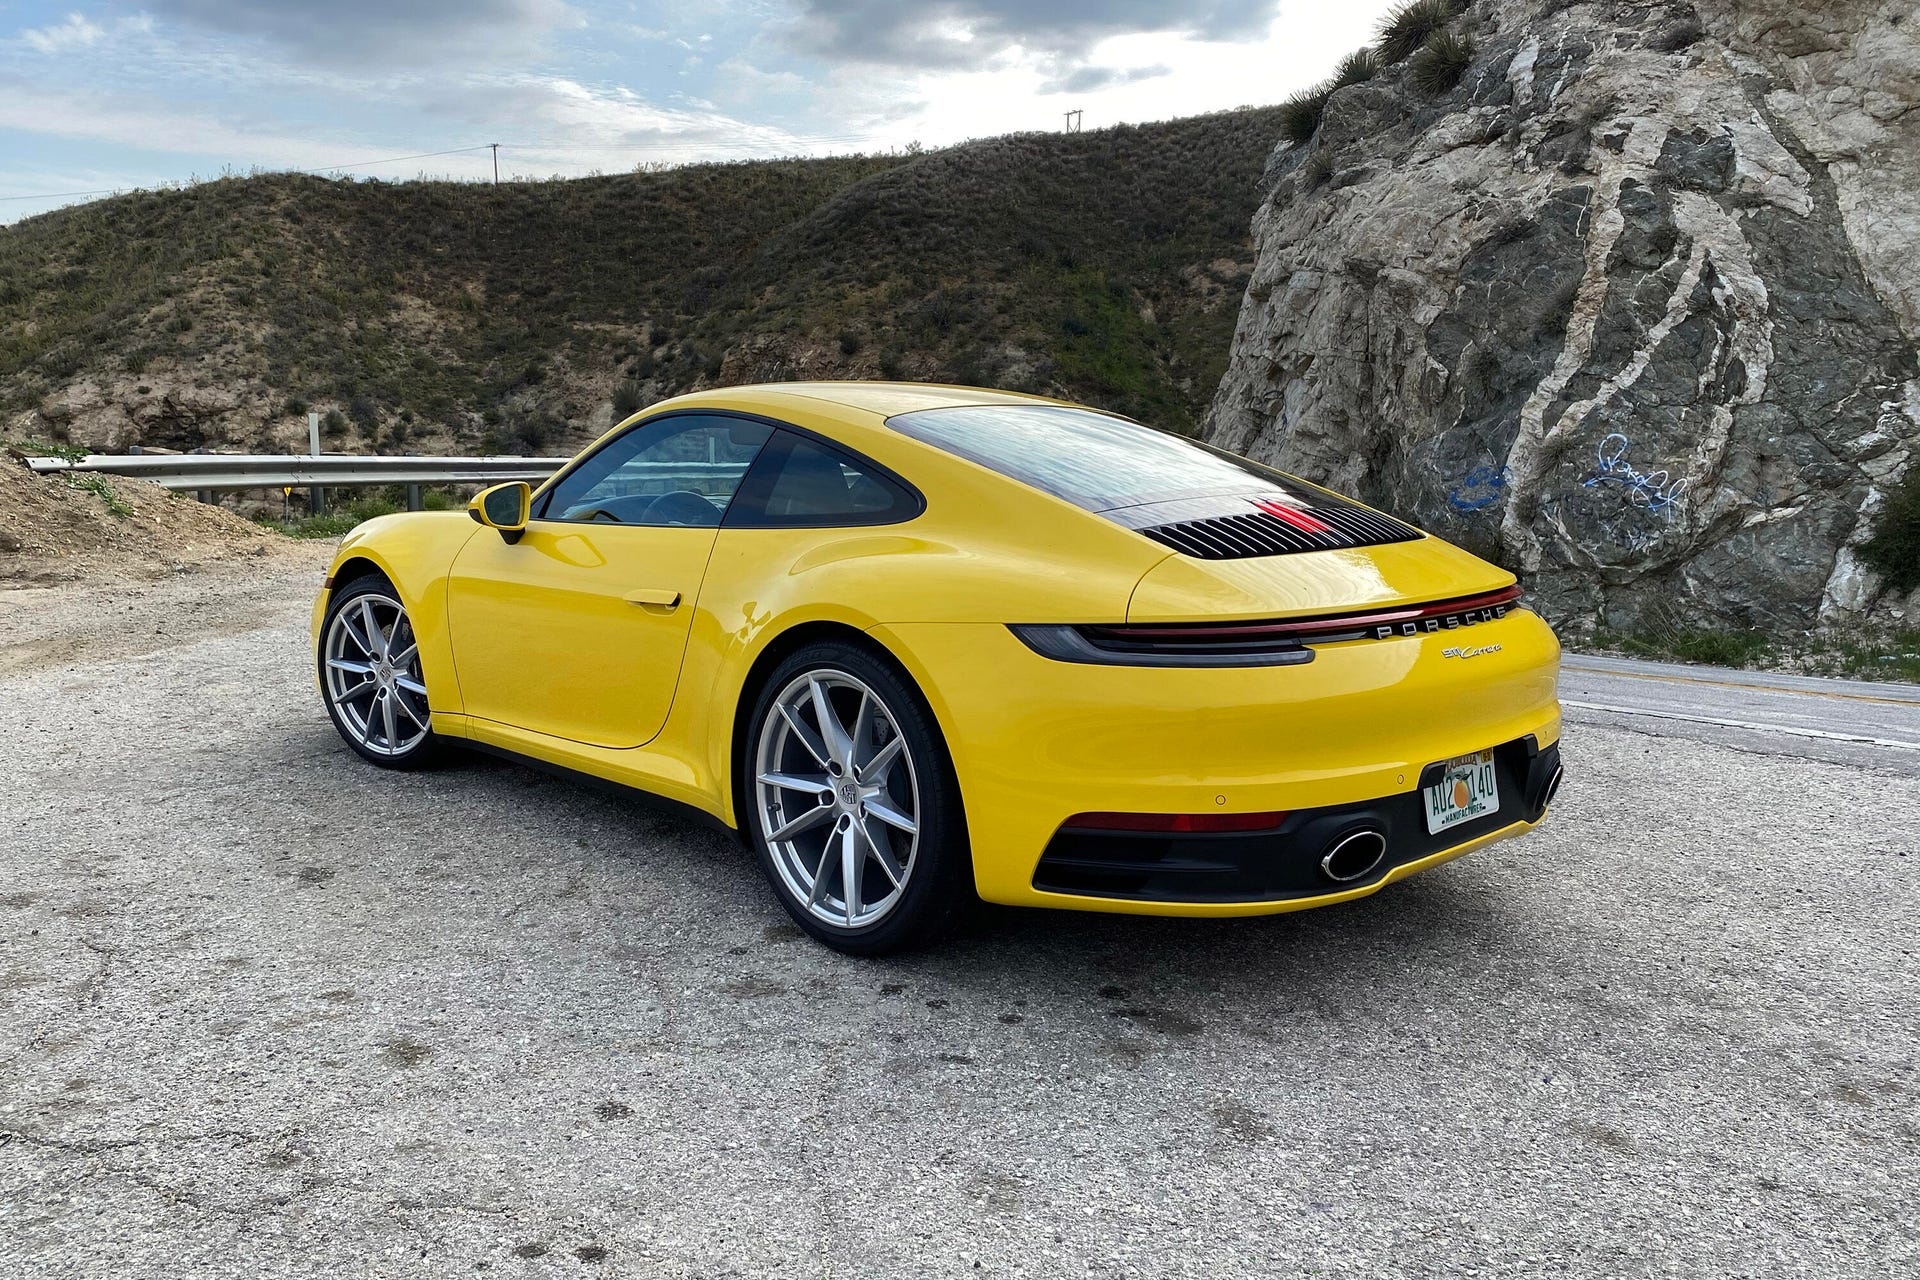 2020 Porsche 911 Carrera review: A solid case for going base - CNET